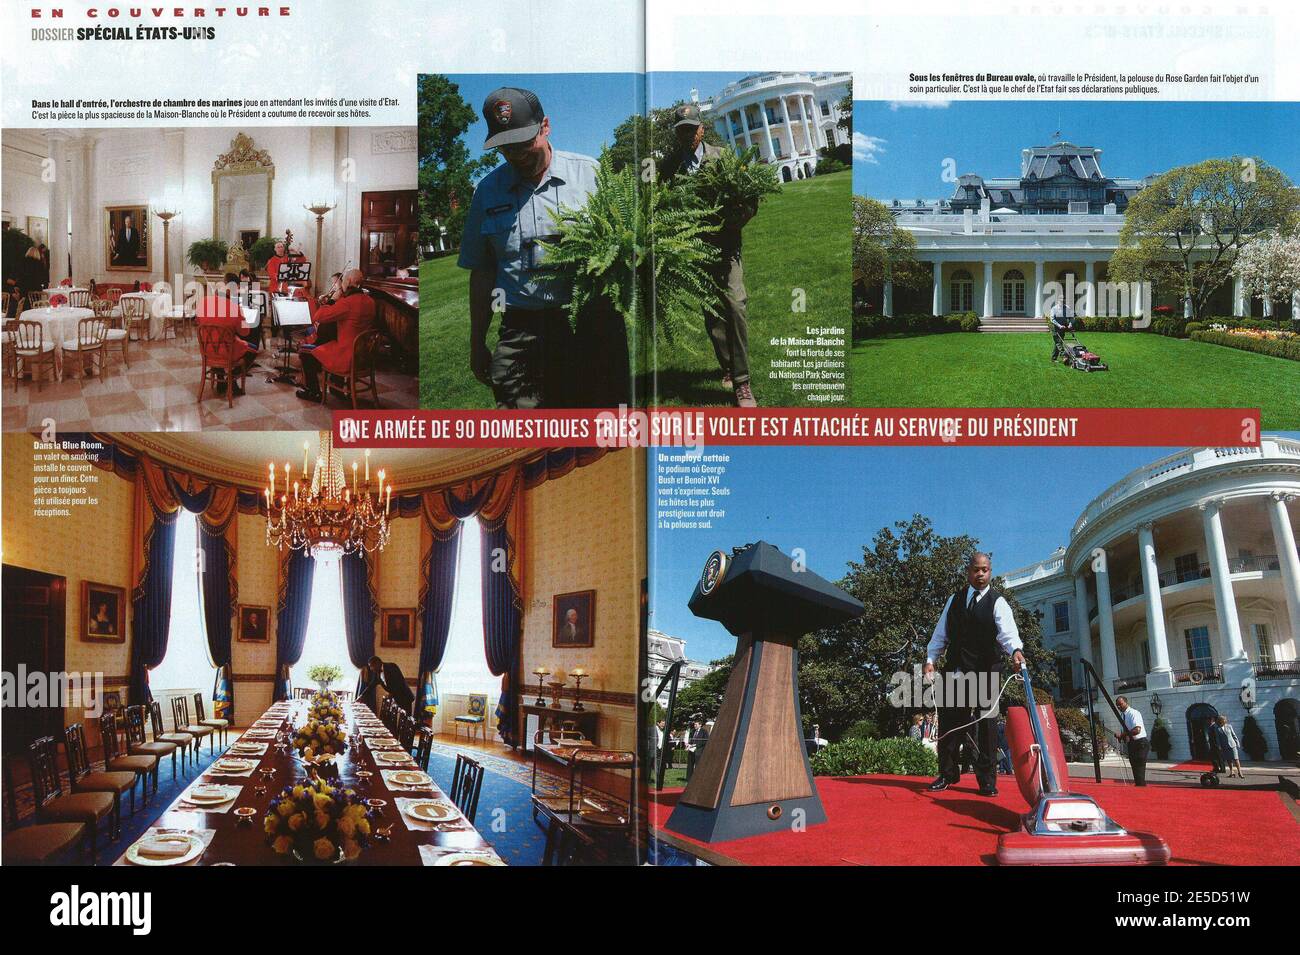 Published in Le Figaro Magazine October 31, 2008 issue. Behind the scenes pictures at the White House in Washington, DC, USA. Photo by Olivier Douliery/ABACAPRESS.COM Local Caption 168597_001 Stock Photo